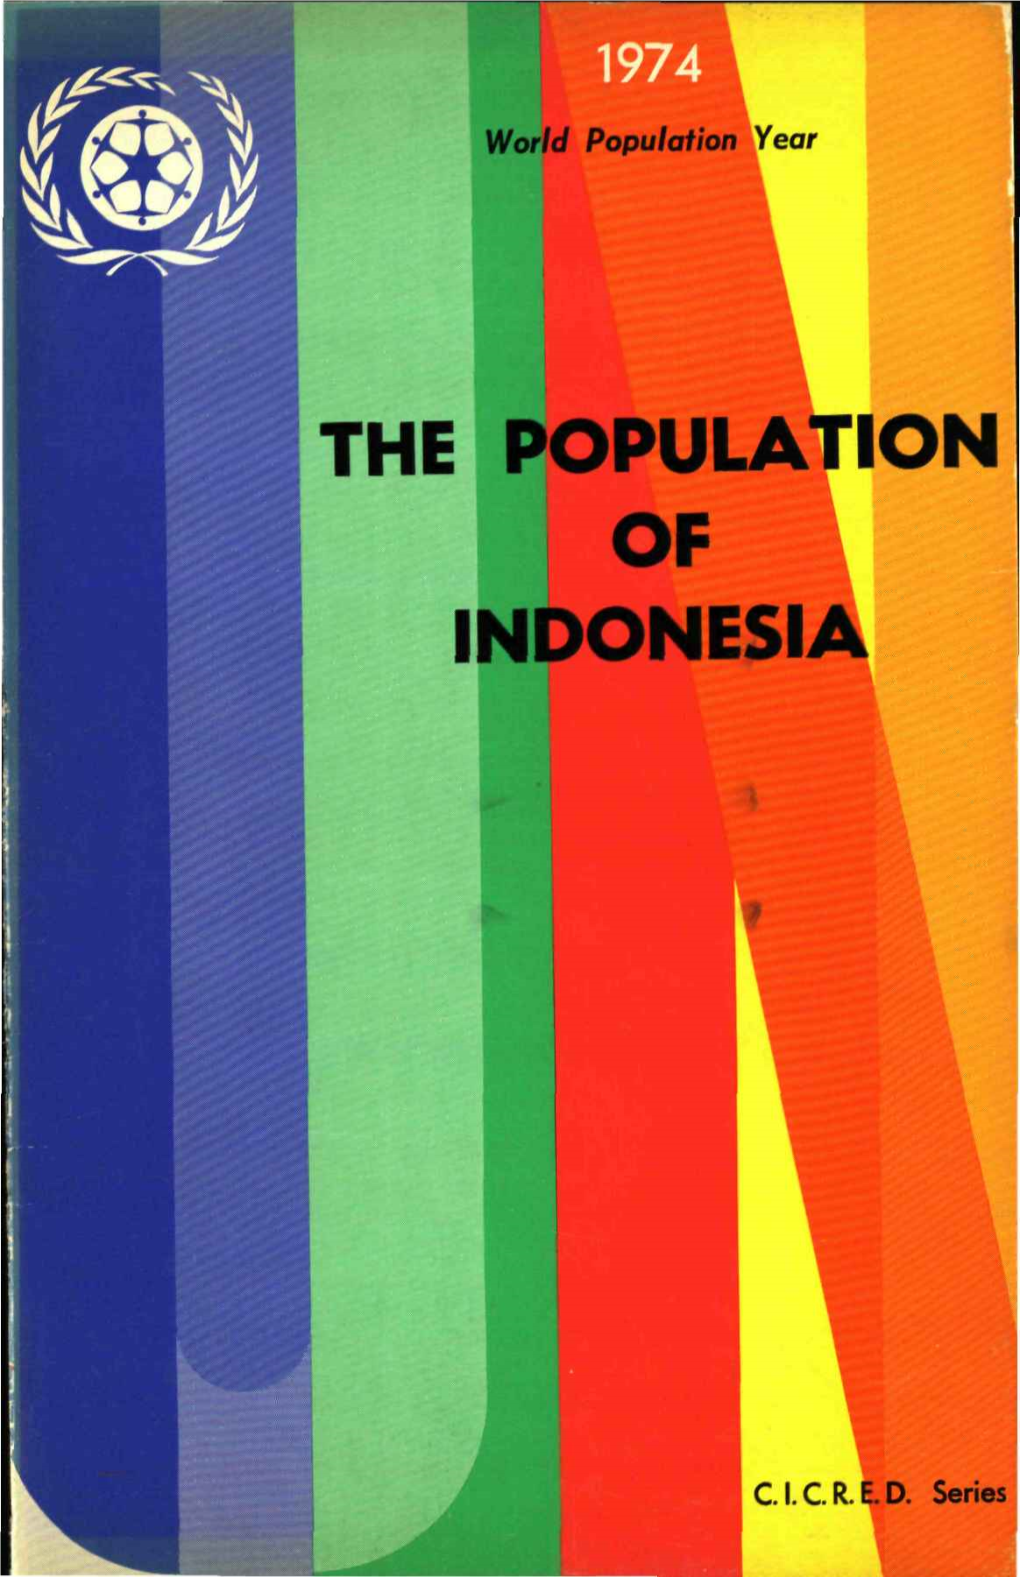 The Population of Indonesia